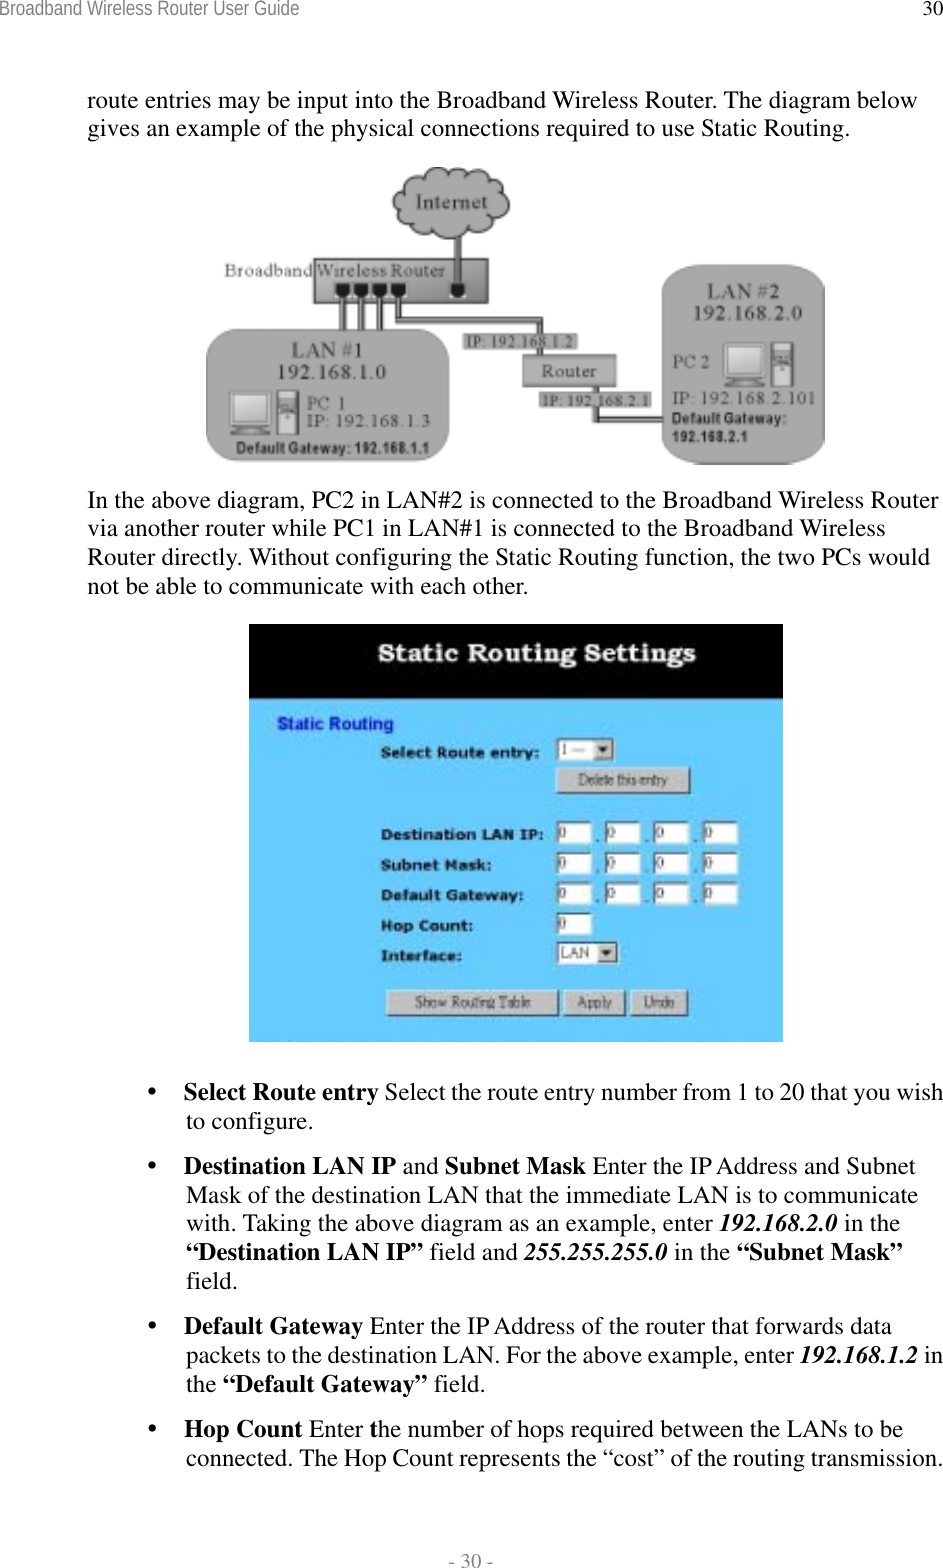 Broadband Wireless Router User Guide  - 30 - 30route entries may be input into the Broadband Wireless Router. The diagram below gives an example of the physical connections required to use Static Routing.   In the above diagram, PC2 in LAN#2 is connected to the Broadband Wireless Router via another router while PC1 in LAN#1 is connected to the Broadband Wireless Router directly. Without configuring the Static Routing function, the two PCs would not be able to communicate with each other.   Select Route entry Select the route entry number from 1 to 20 that you wish to configure.  Destination LAN IP and Subnet Mask Enter the IP Address and Subnet Mask of the destination LAN that the immediate LAN is to communicate with. Taking the above diagram as an example, enter 192.168.2.0 in the “Destination LAN IP” field and 255.255.255.0 in the “Subnet Mask” field.  Default Gateway Enter the IP Address of the router that forwards data packets to the destination LAN. For the above example, enter 192.168.1.2 in the “Default Gateway” field.  Hop Count Enter the number of hops required between the LANs to be connected. The Hop Count represents the “cost” of the routing transmission. 